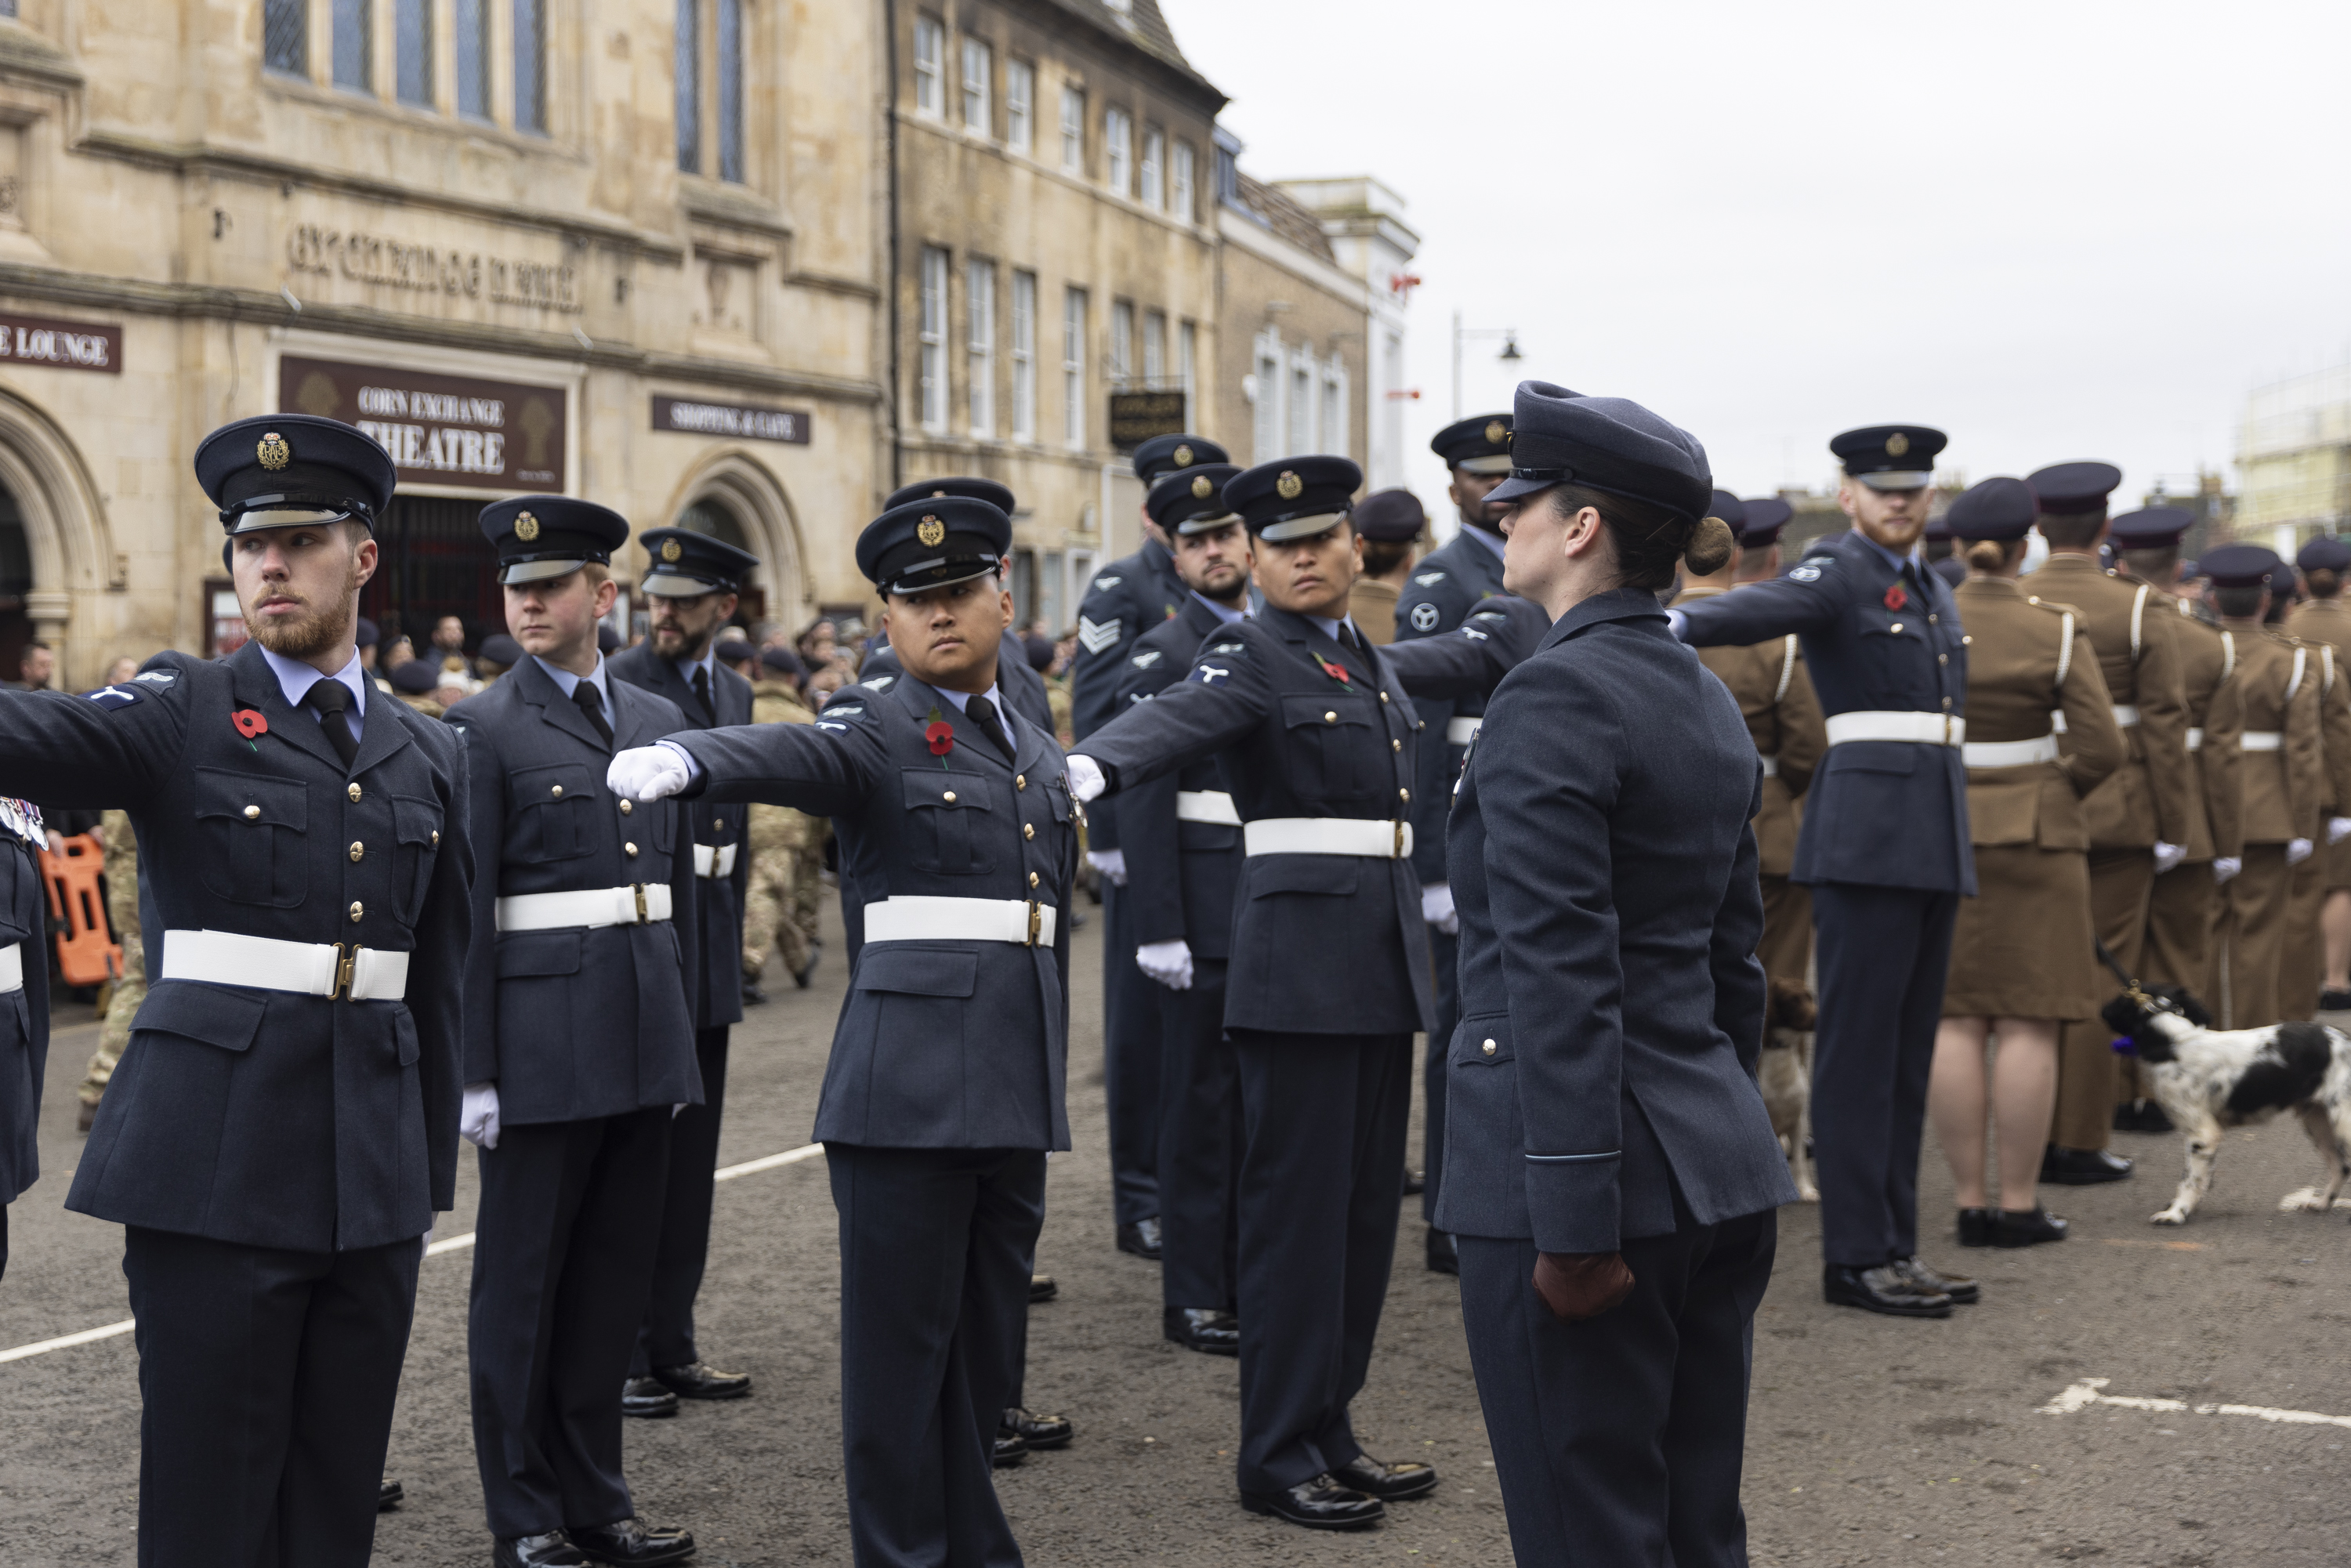 RAF Wittering personnel attend the Remembrance Parade and Service in Stamford